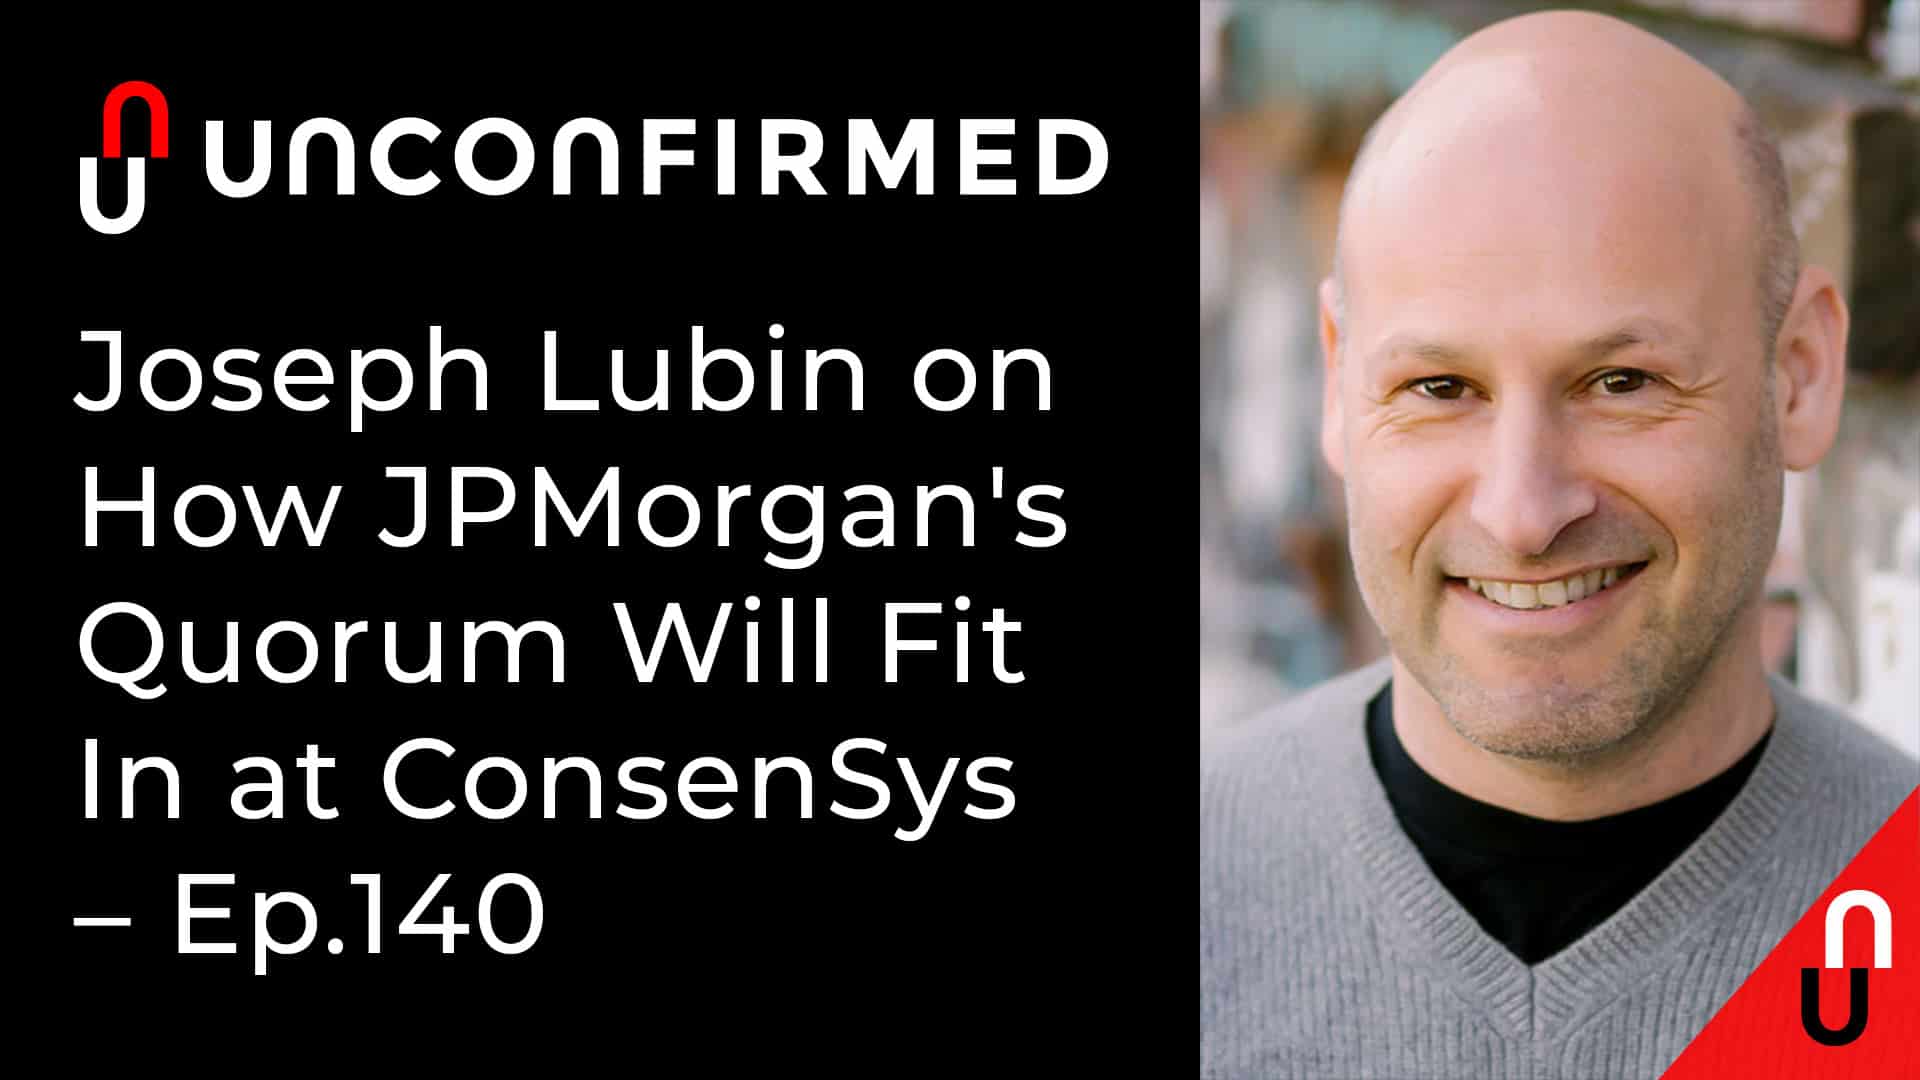 Unconfirmed - Ep.140 - Joseph Lubin on How JPMorgan's Quorum Will Fit In at ConsenSys